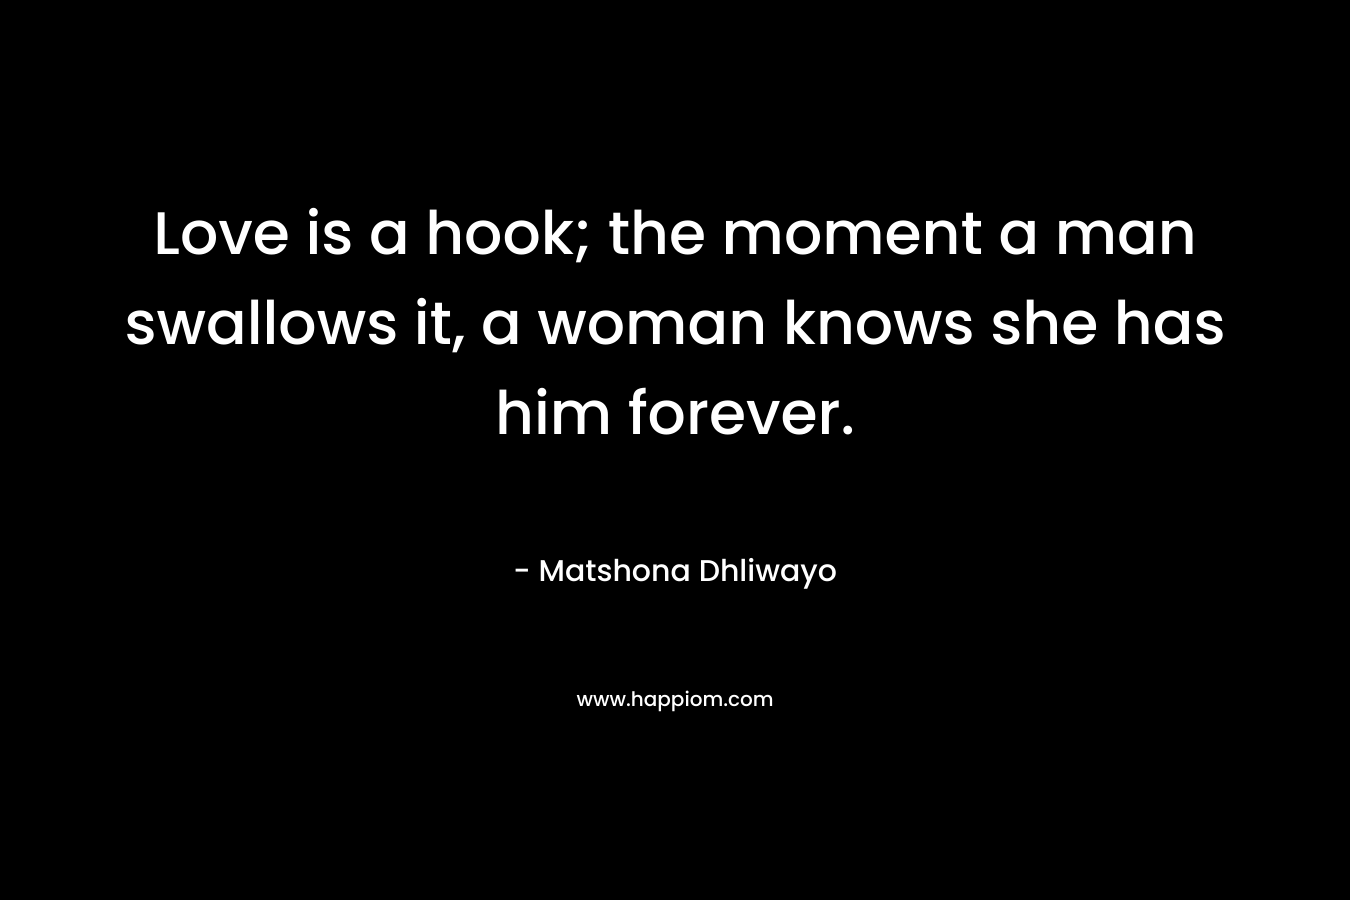 Love is a hook; the moment a man swallows it, a woman knows she has him forever. – Matshona Dhliwayo